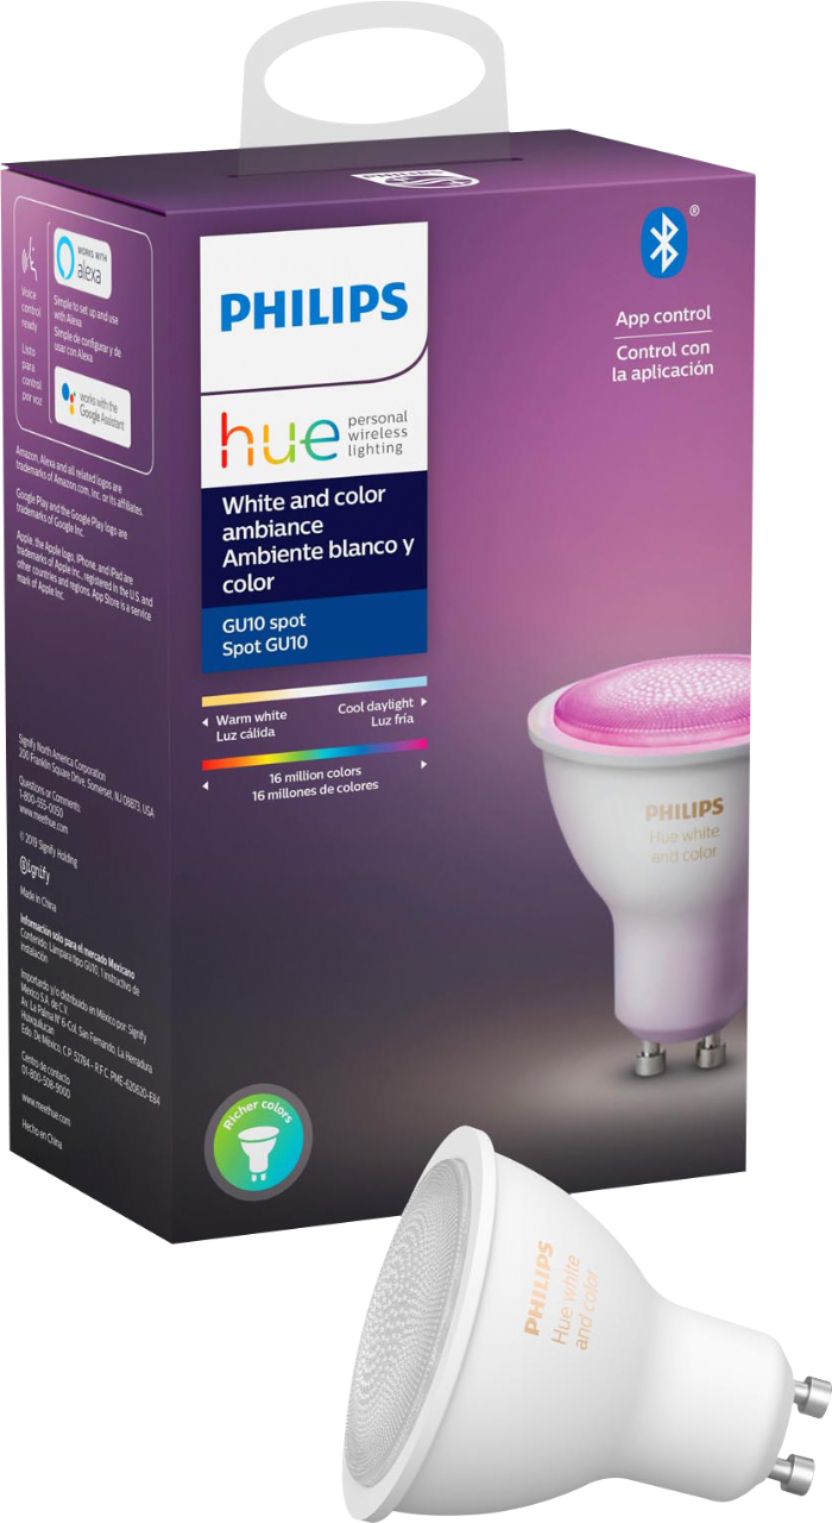 Philips Hue GU10 Bluetooth Smart Bulb White and Ambiance - Best Buy